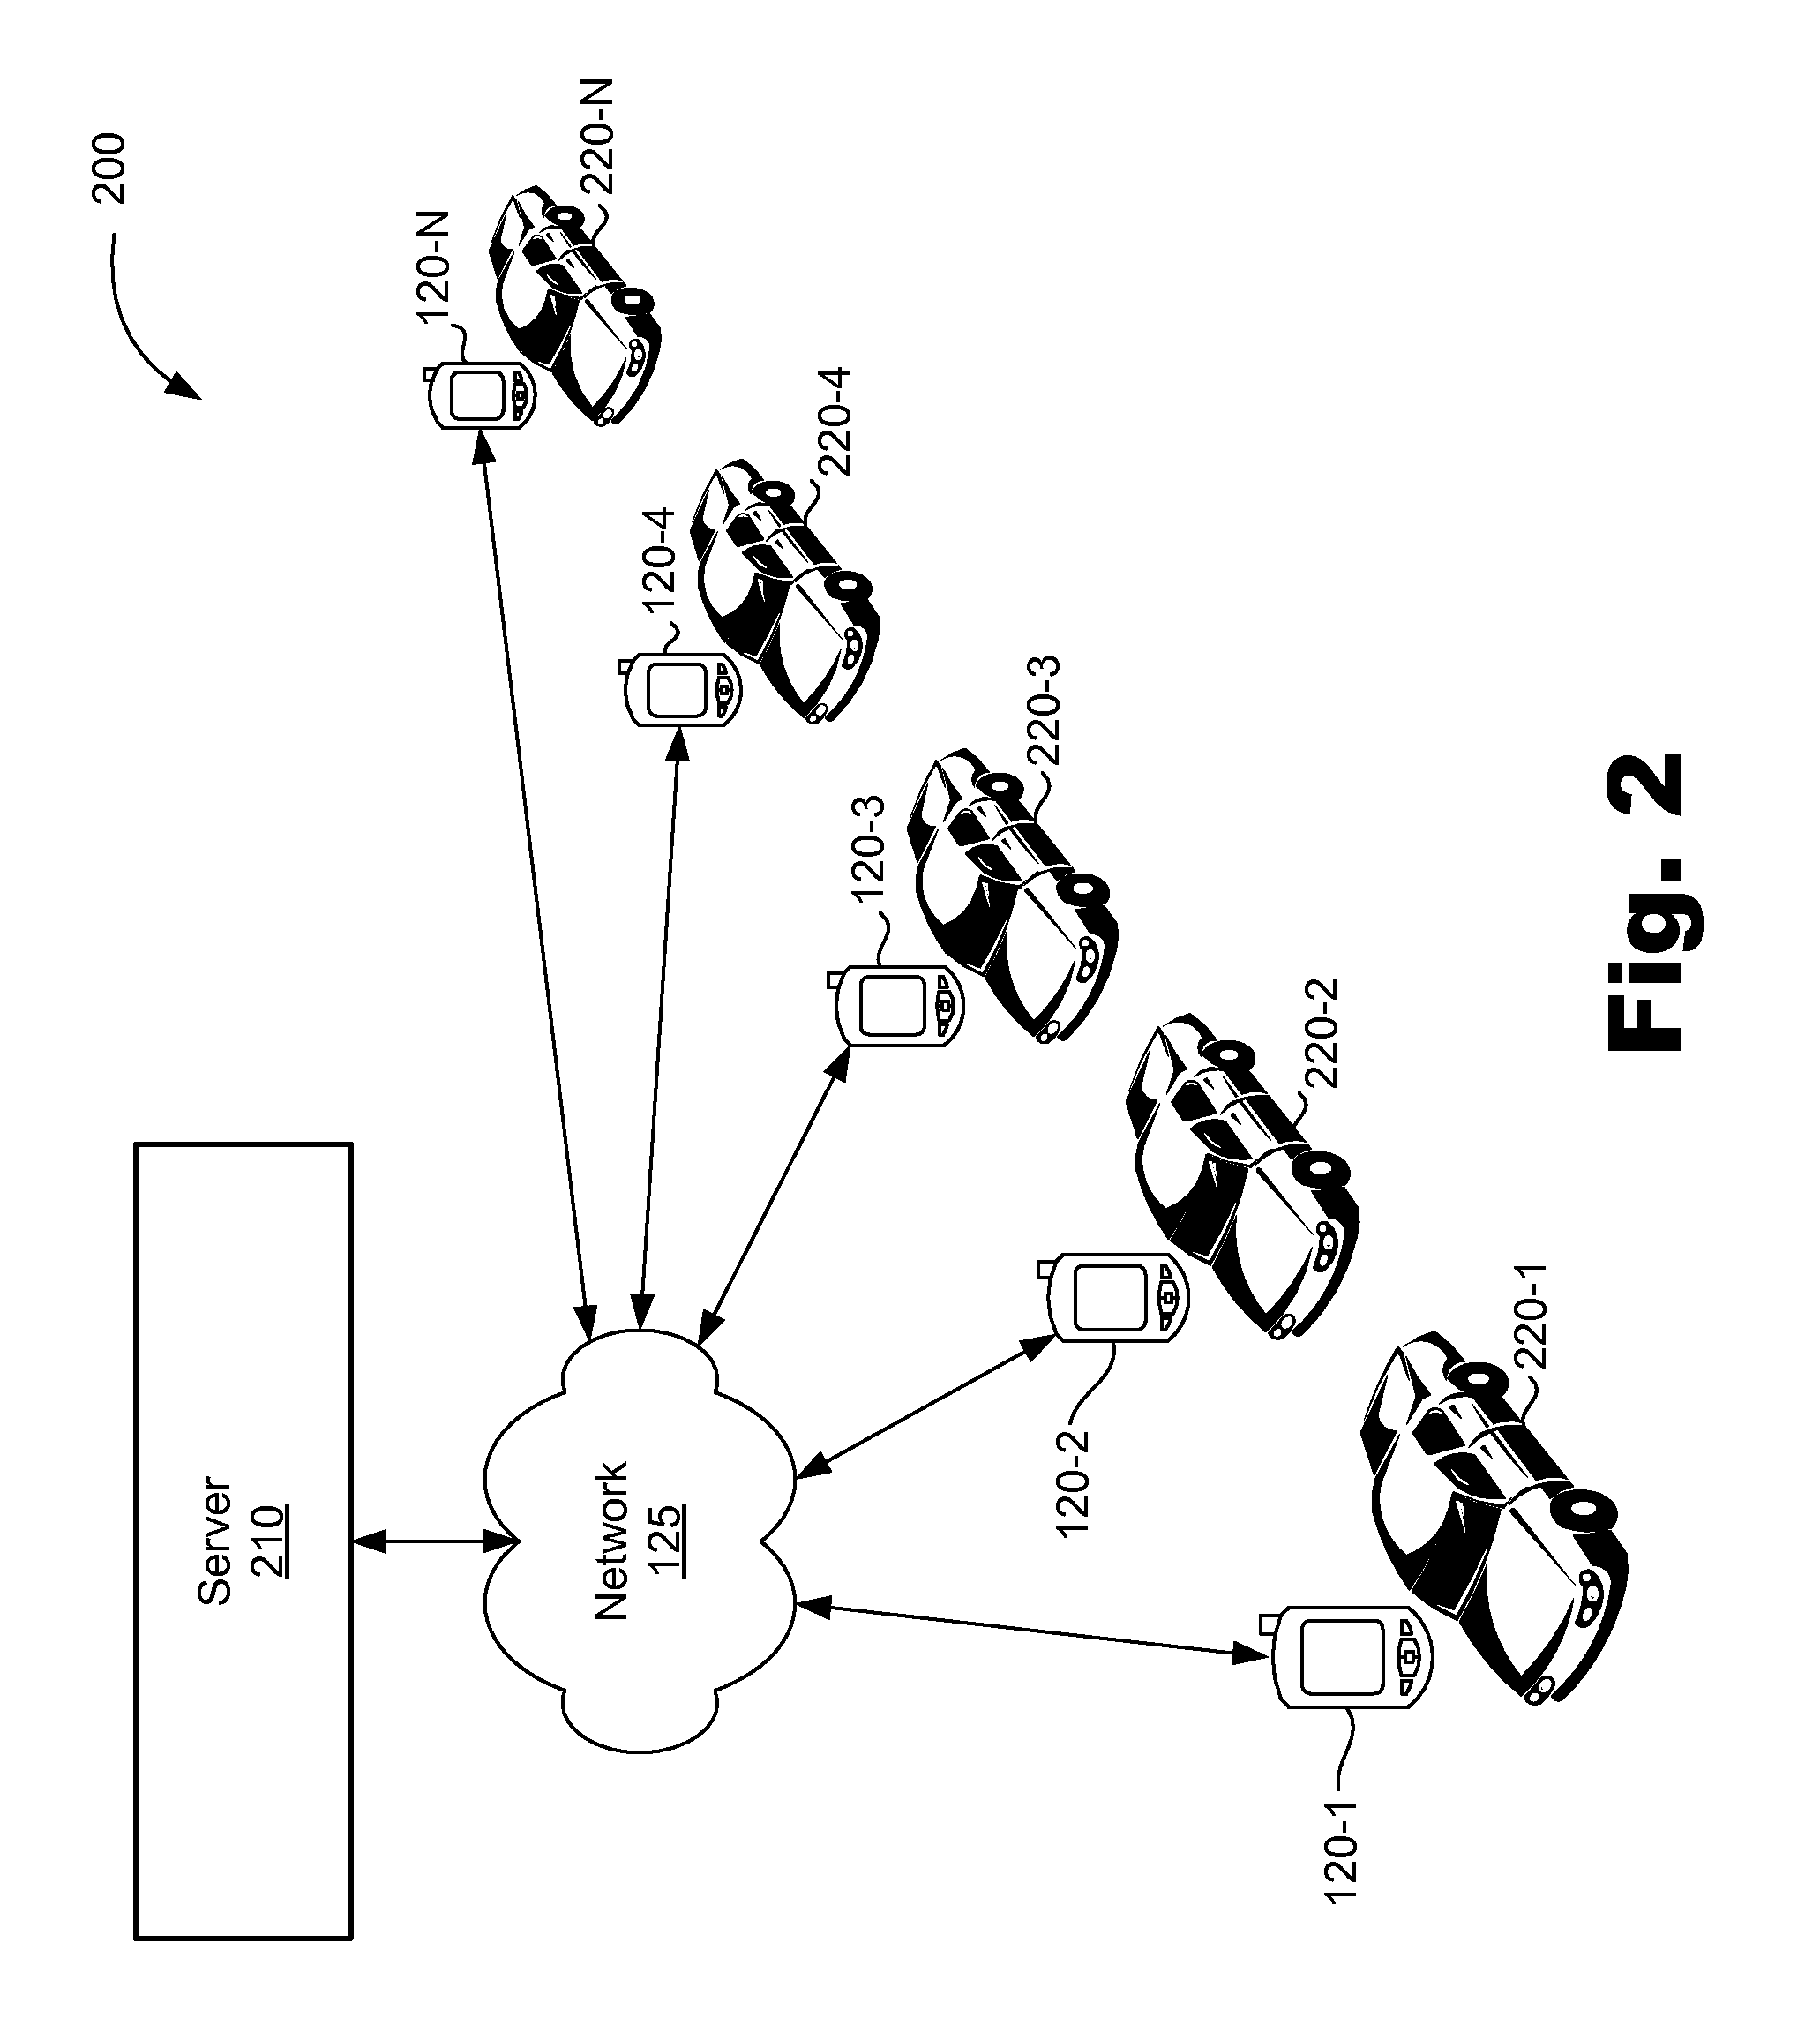 Traffic monitoring systems and methods